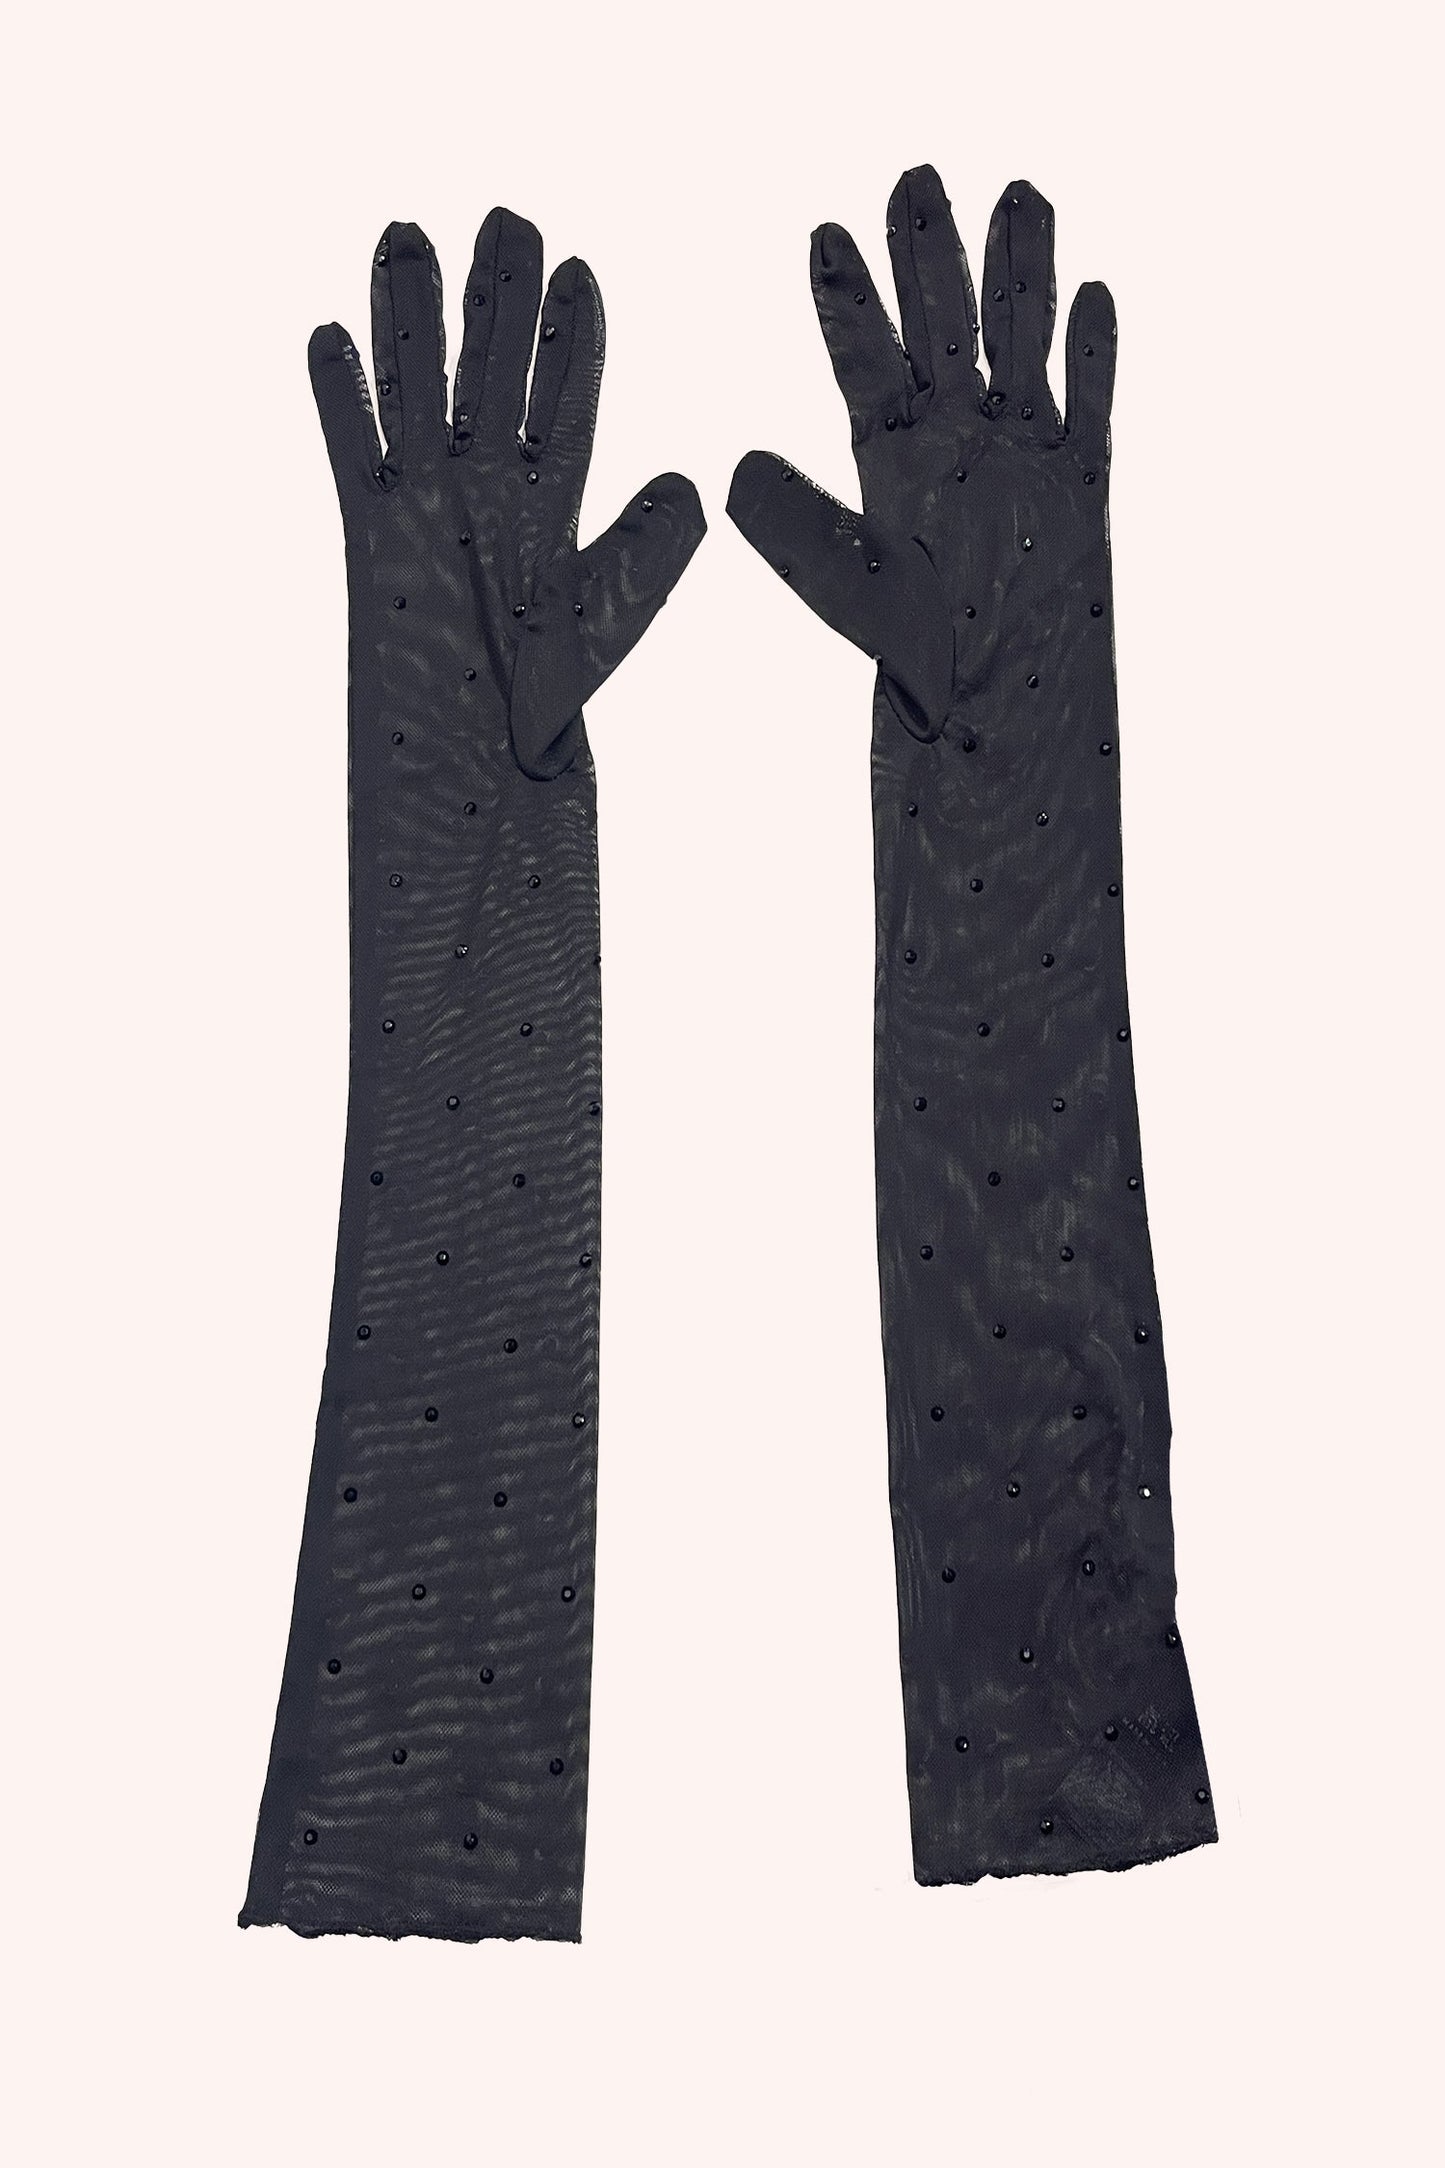 Rhinestone Mesh Gloves Black, small darker stones placed in a diamond shapes, elbow long